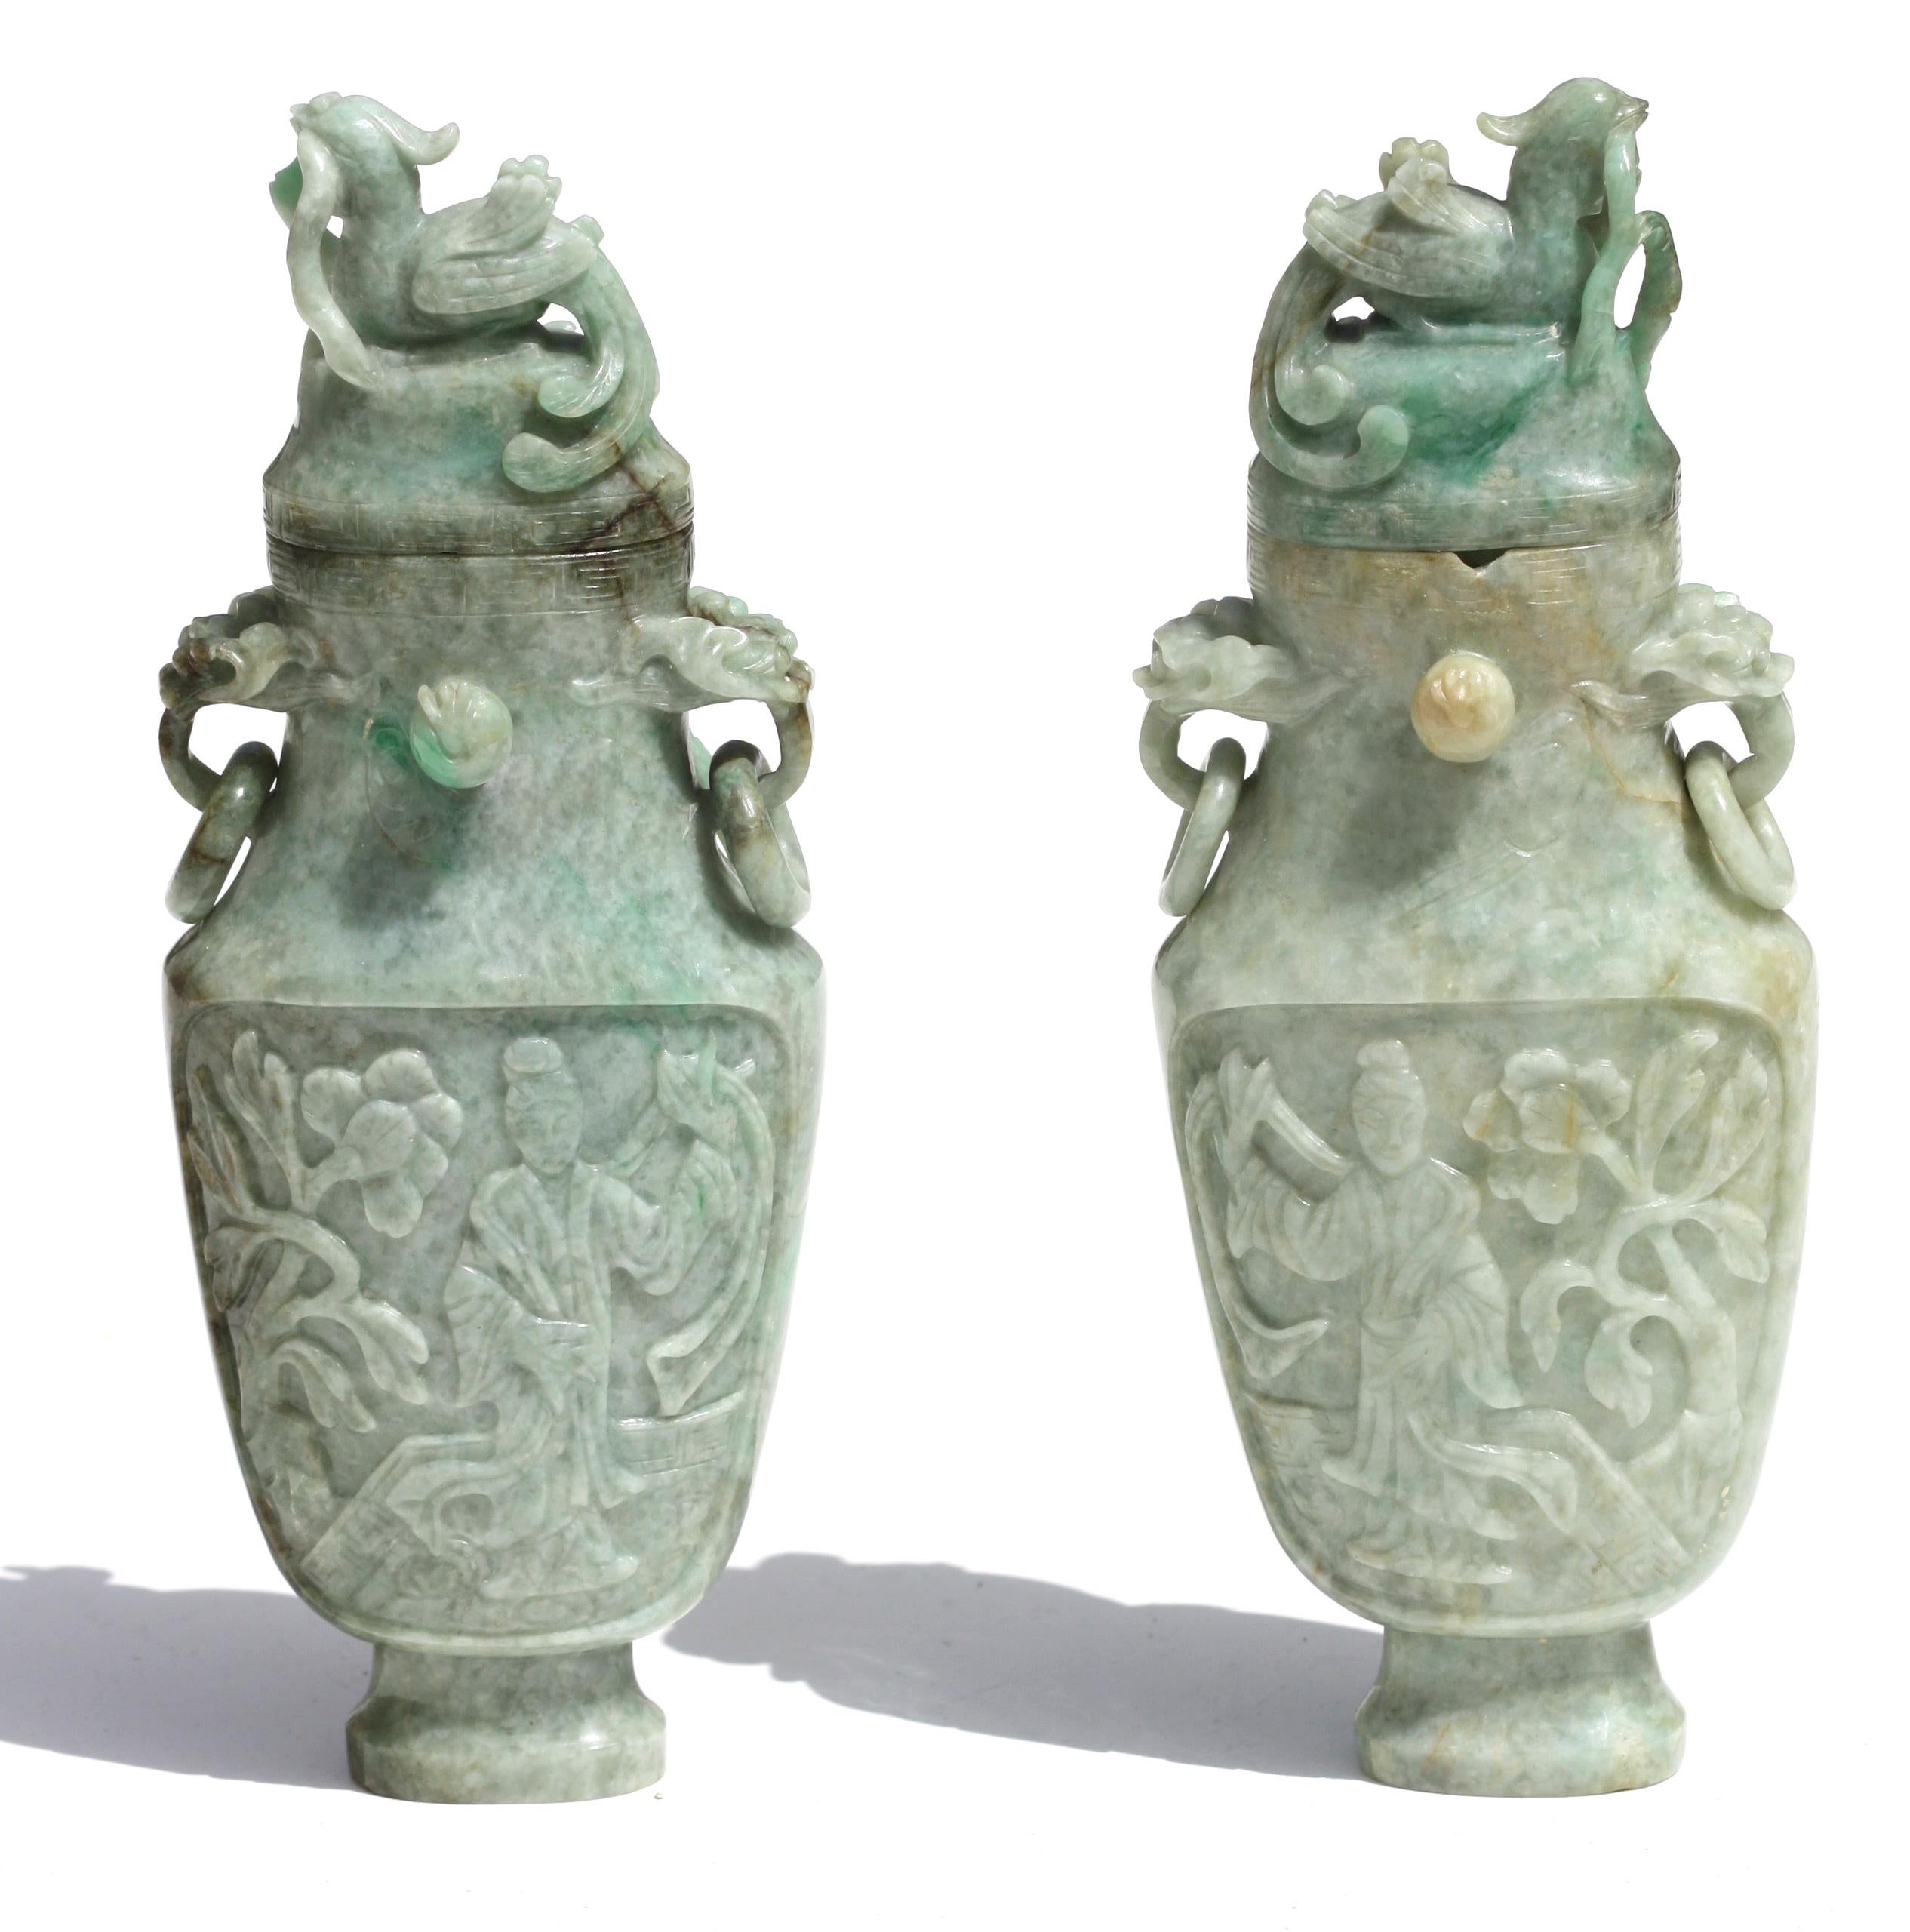 Pair of Chinese carved Jadeite Archaistic vases and covers
Each of bottle form, reserved with beauties and flowers, below a kylinin relief, flanked by beast handles, suspending loose rings, the cover surmounted by a mythological figure.
Measure: